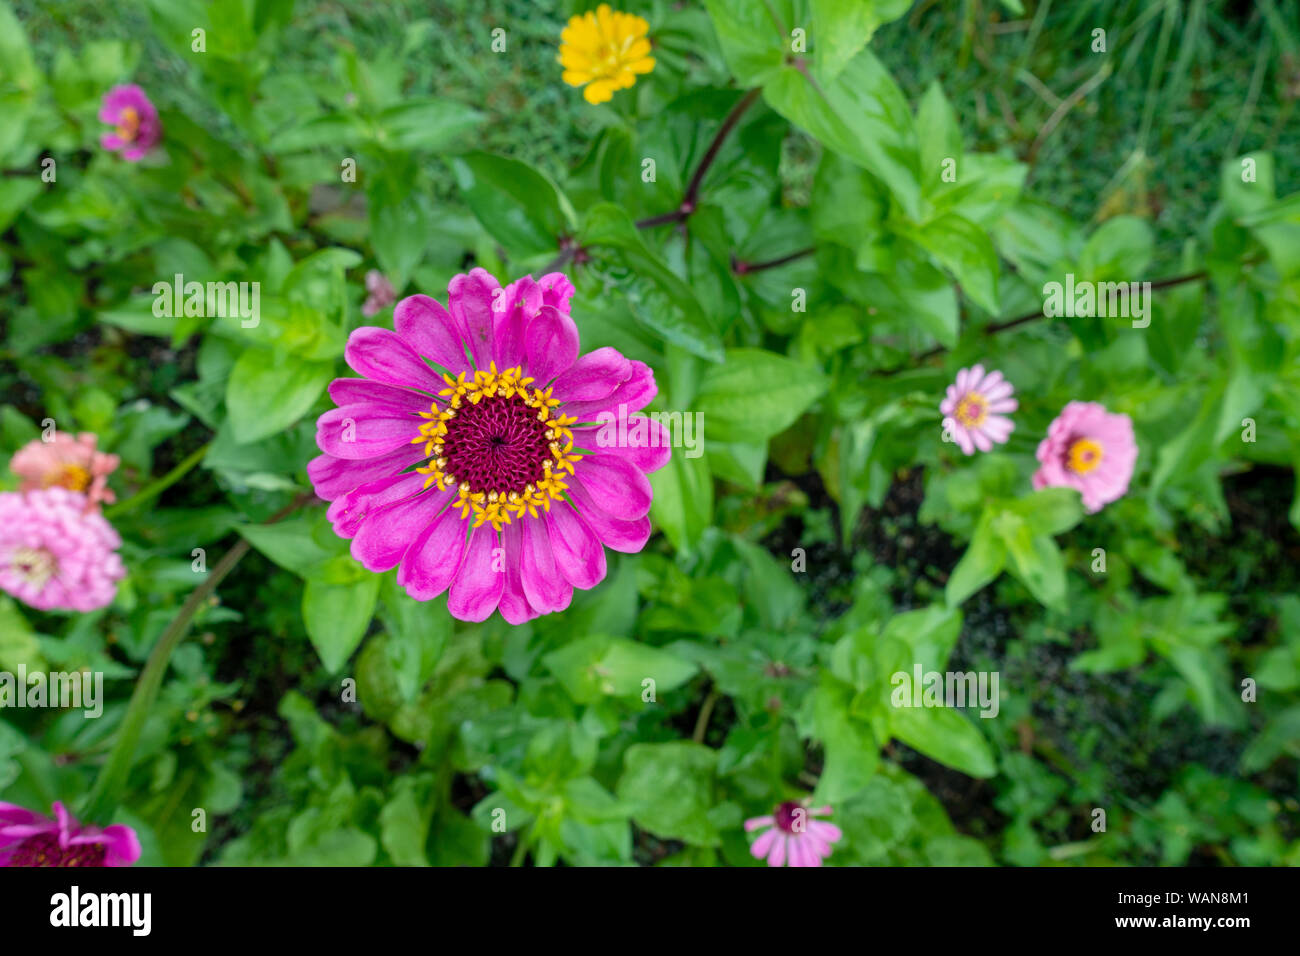 Pink Zinnia elegans California Giant flower in garden with other blooms surrounding Stock Photo